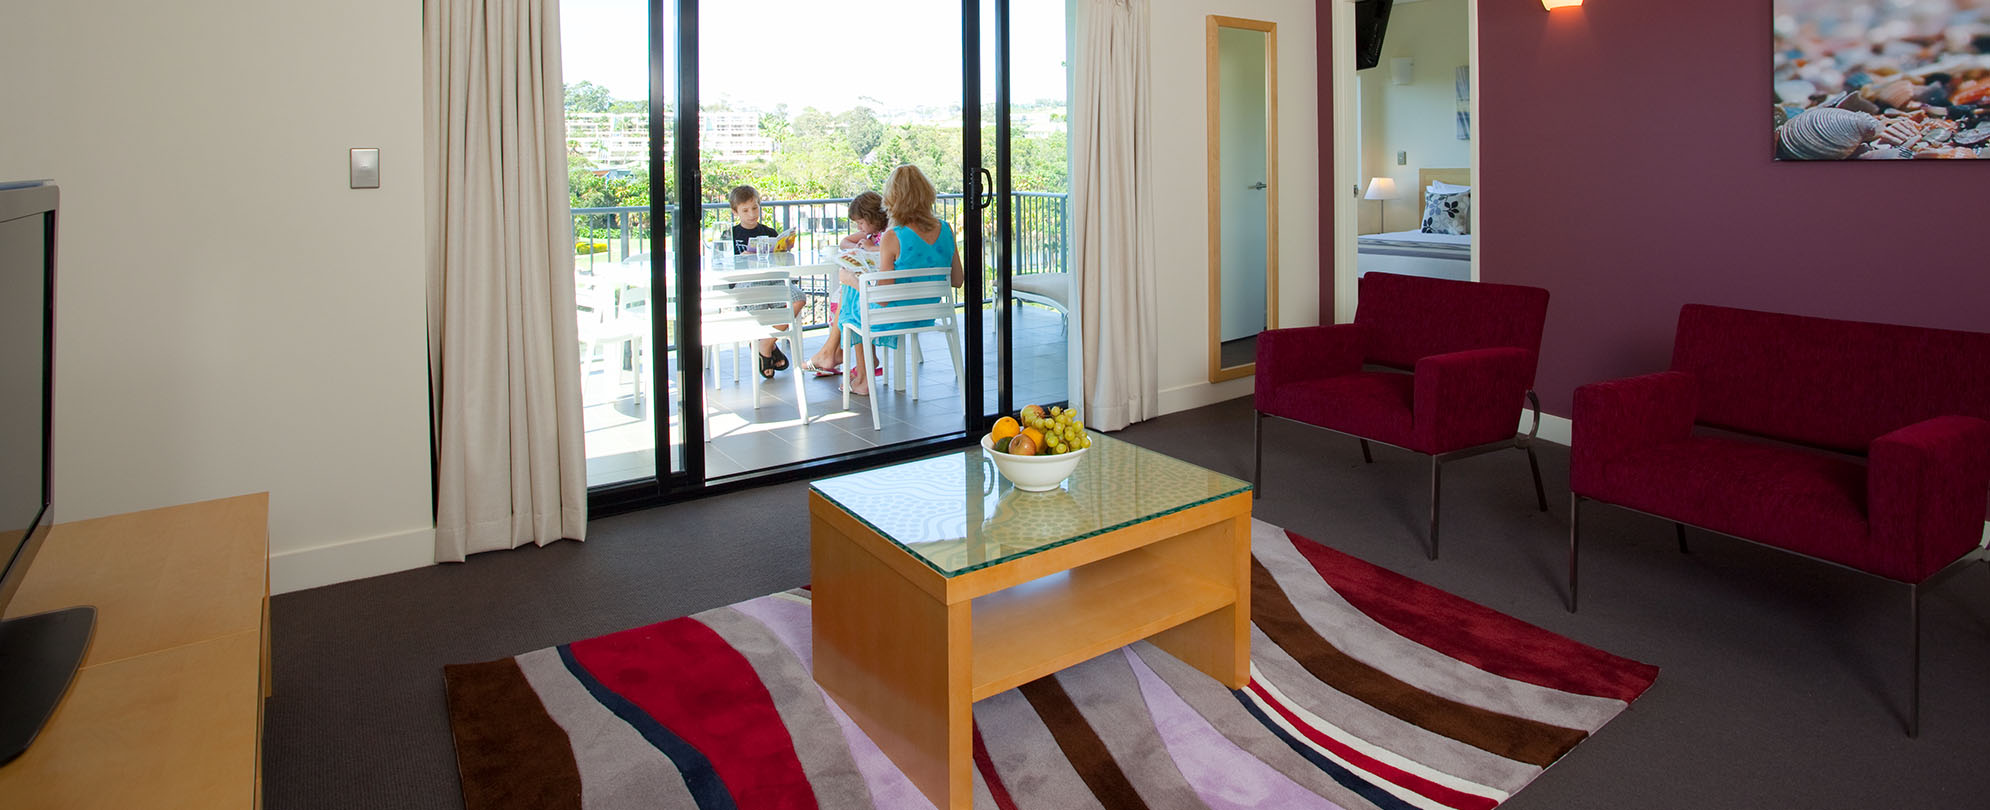 The living room and balcony of a 2-bedroom grand suite at Club Wyndham Coffs Harbor.